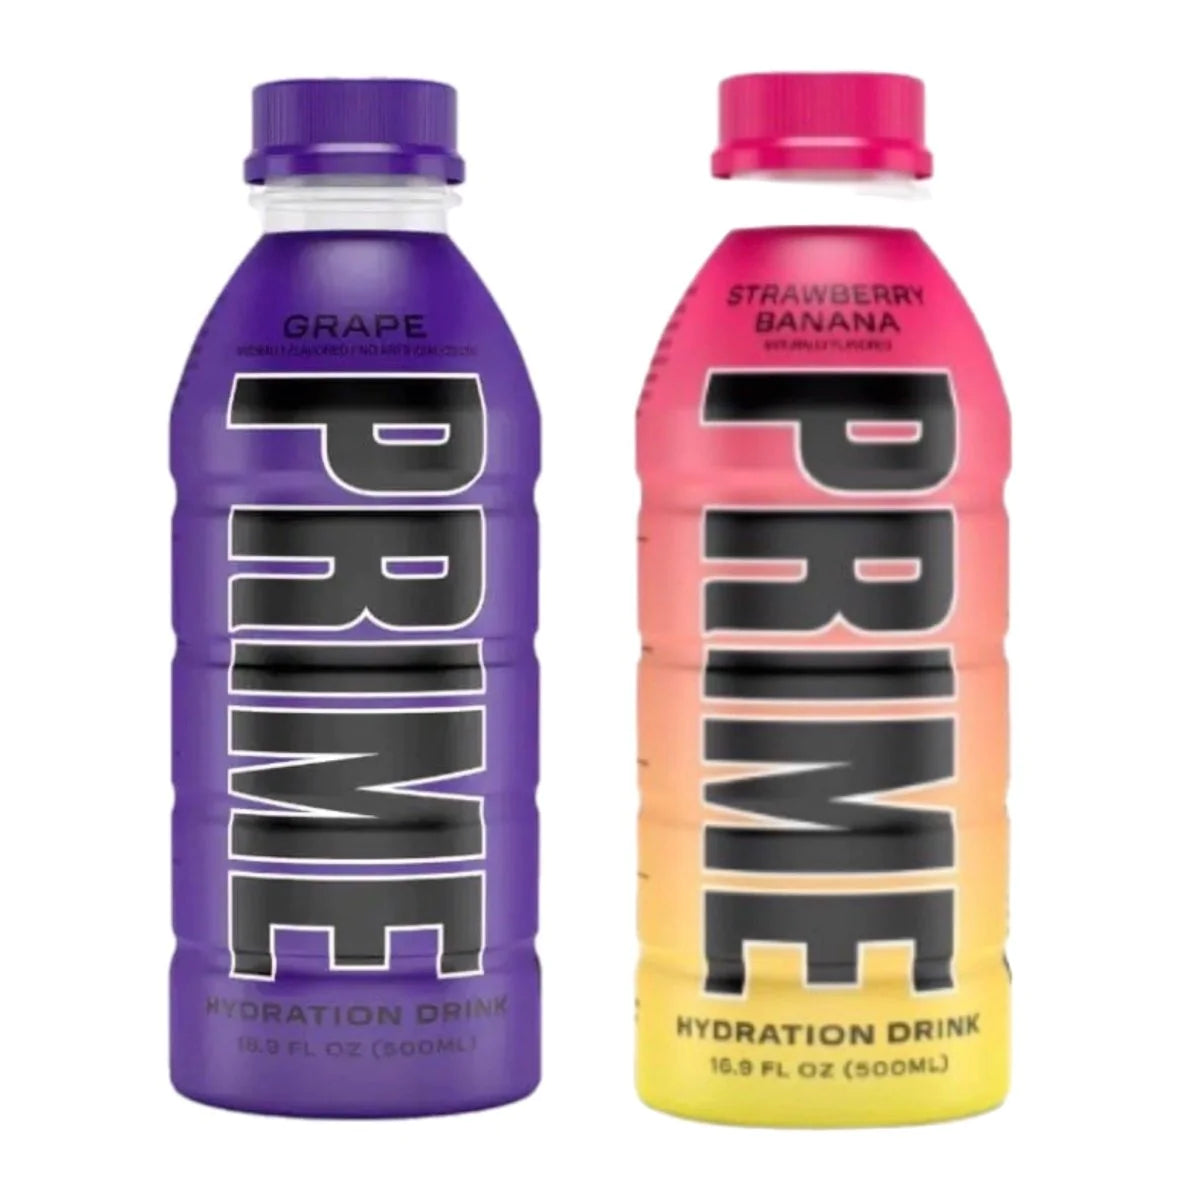 Grape and Strawberry Banana Prime Twin Pack Pre-Order